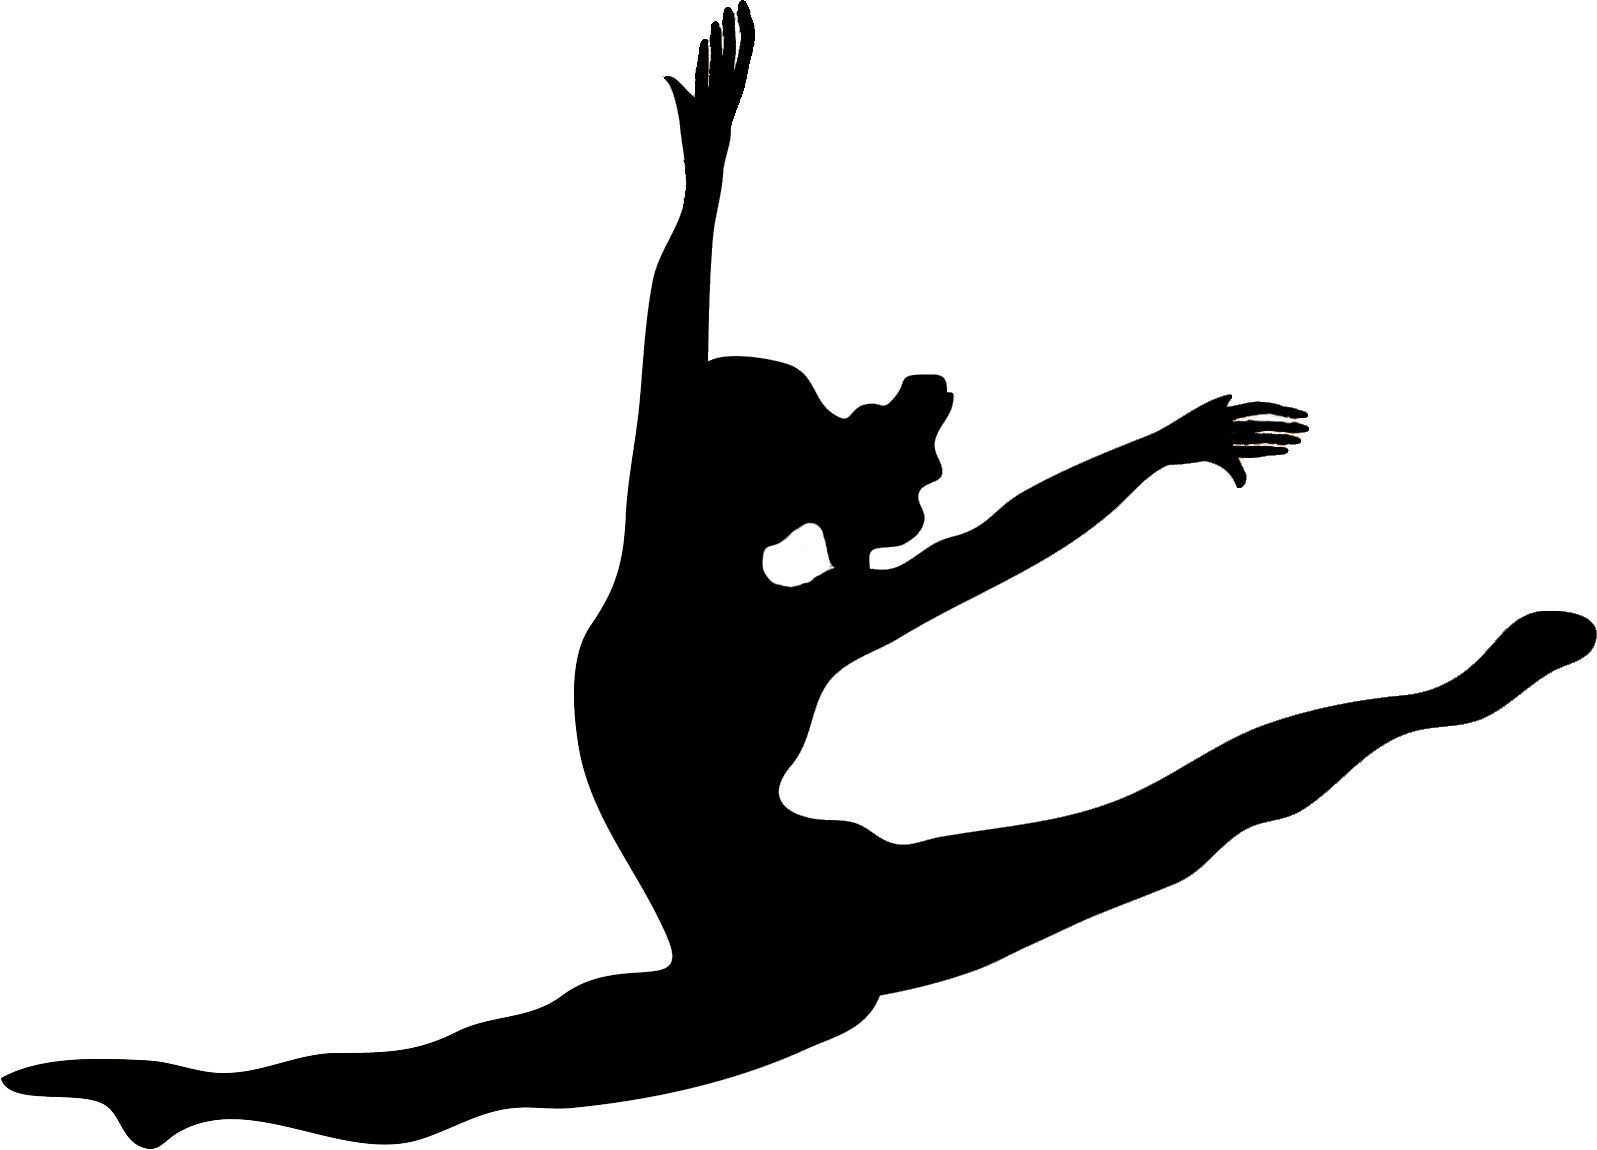 Dance silhouettes vector- Get a silhouette of myself doing a leap and then get a tattoo from that! Descr. Dance silhouette, Silhouette clip art, Dancer silhouette